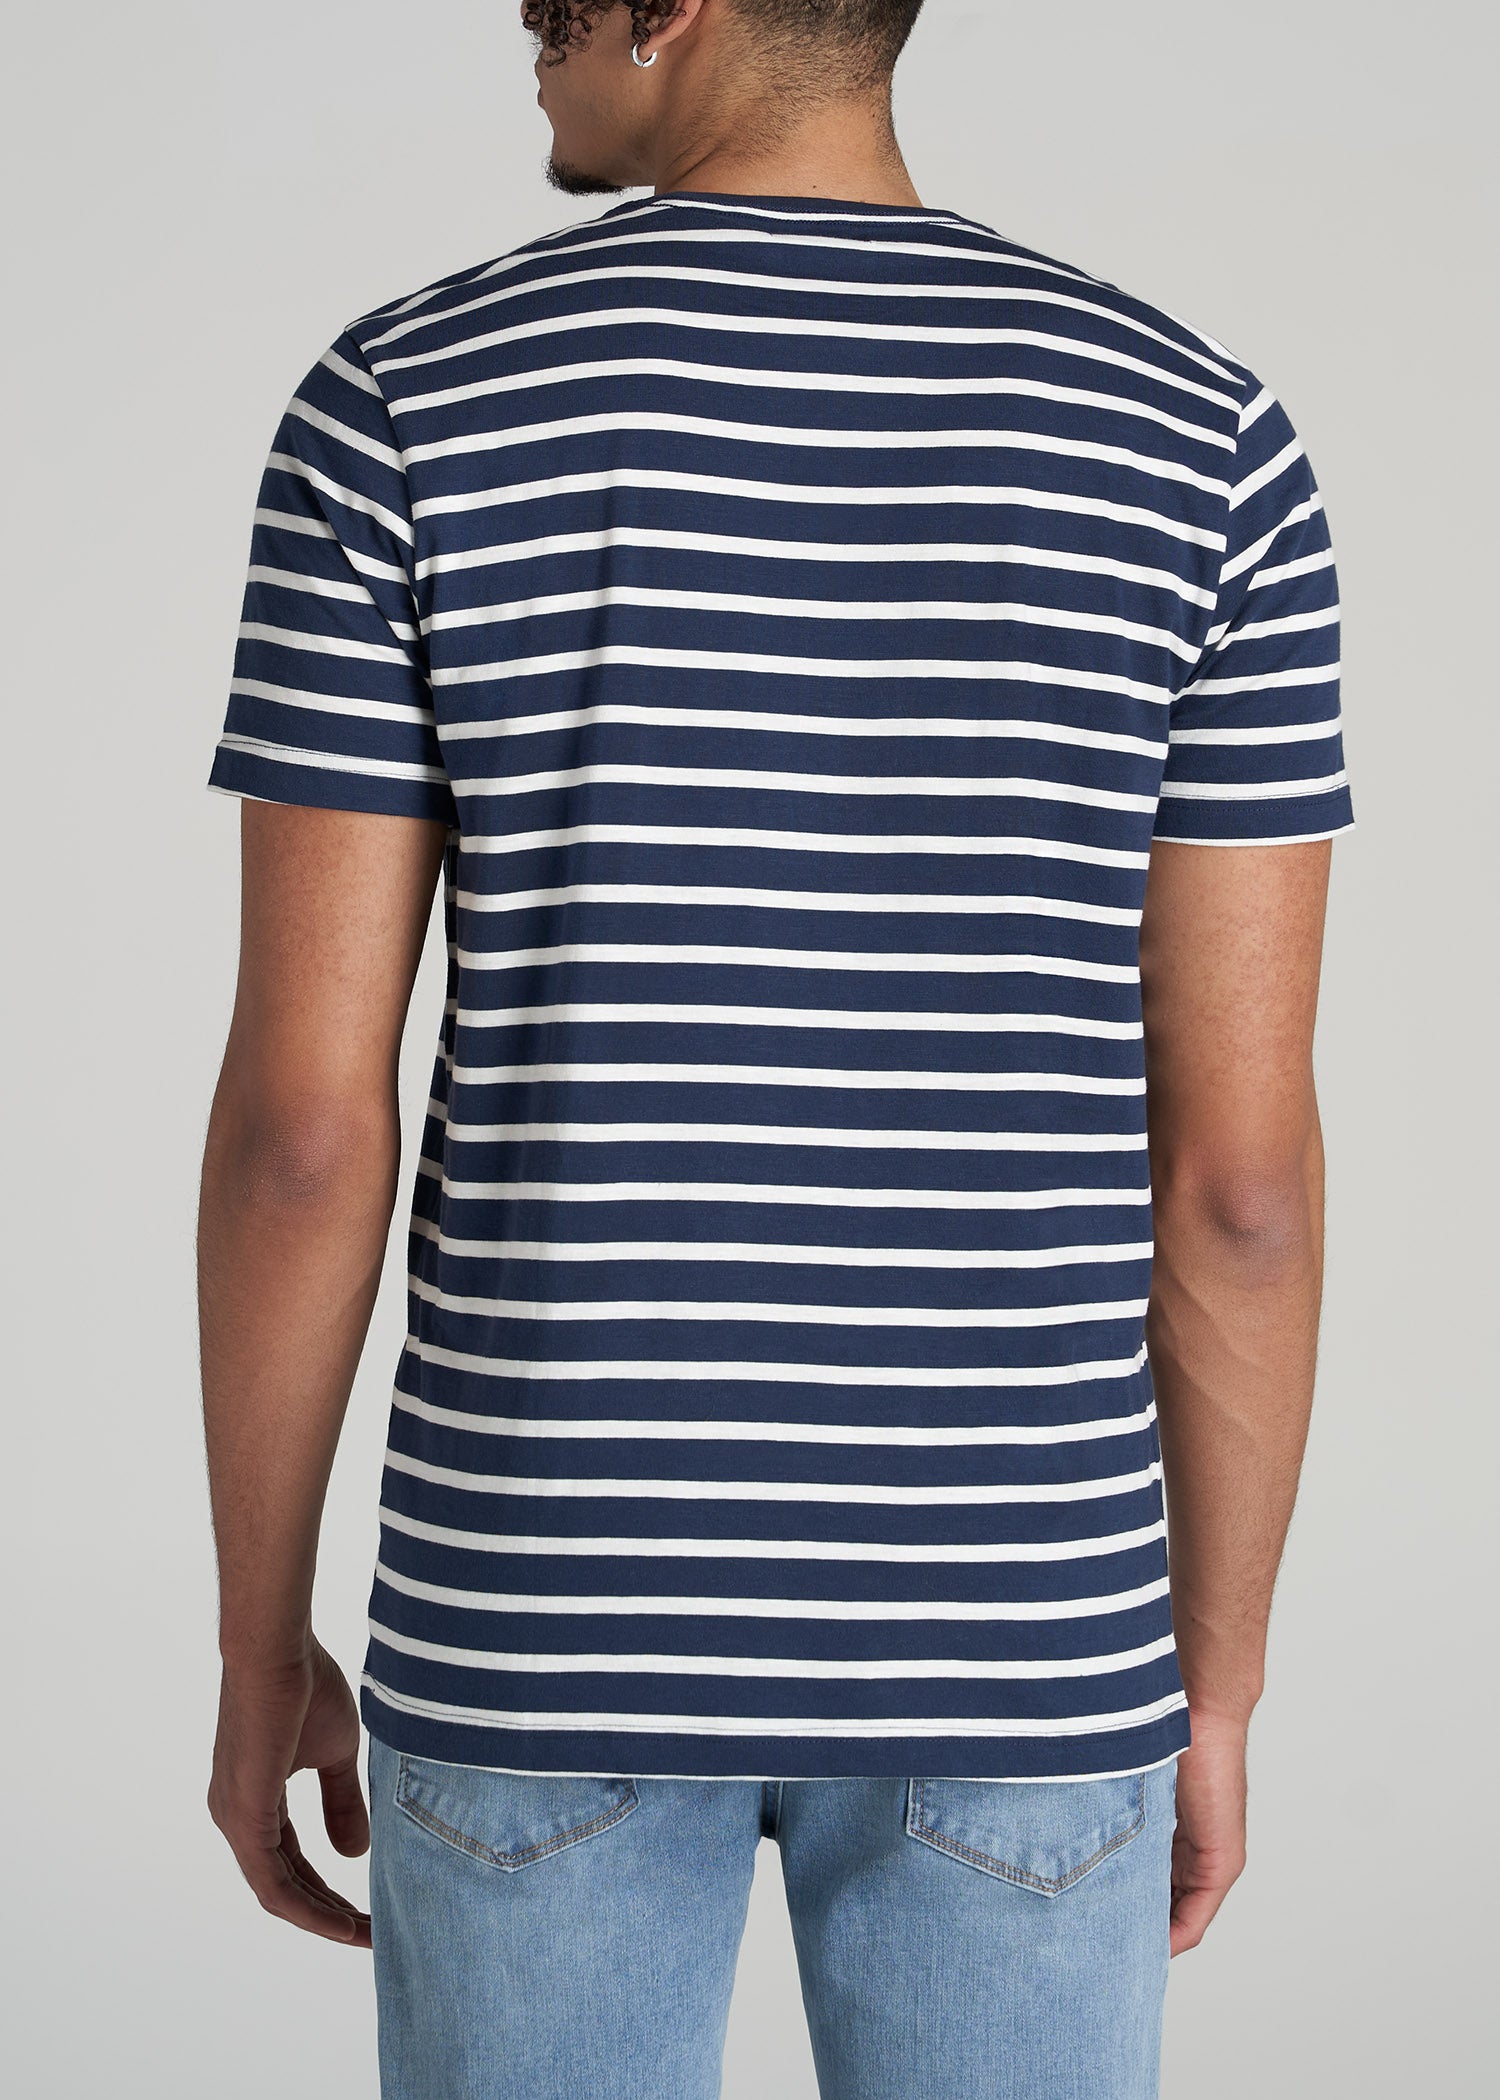 American Tall Regular-Fit Striped Tee in Navy and White - Men's Tall T-Shirt M / Tall / Navy and White Stripe